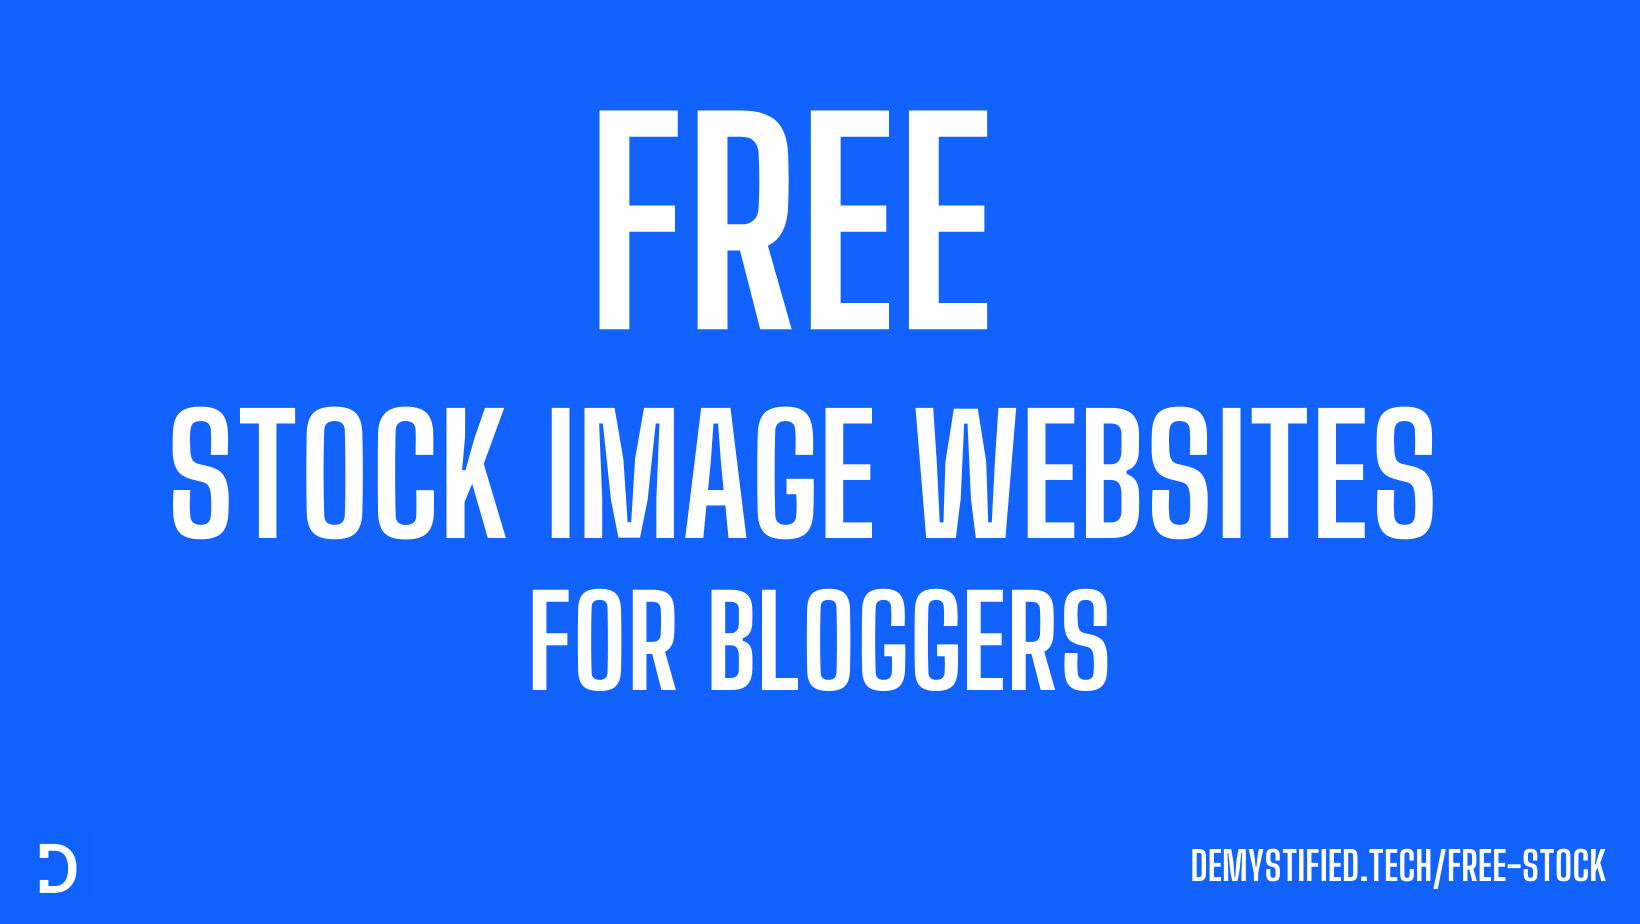 Top Free Stock Image Websites for Bloggers & Content Creators in 2022